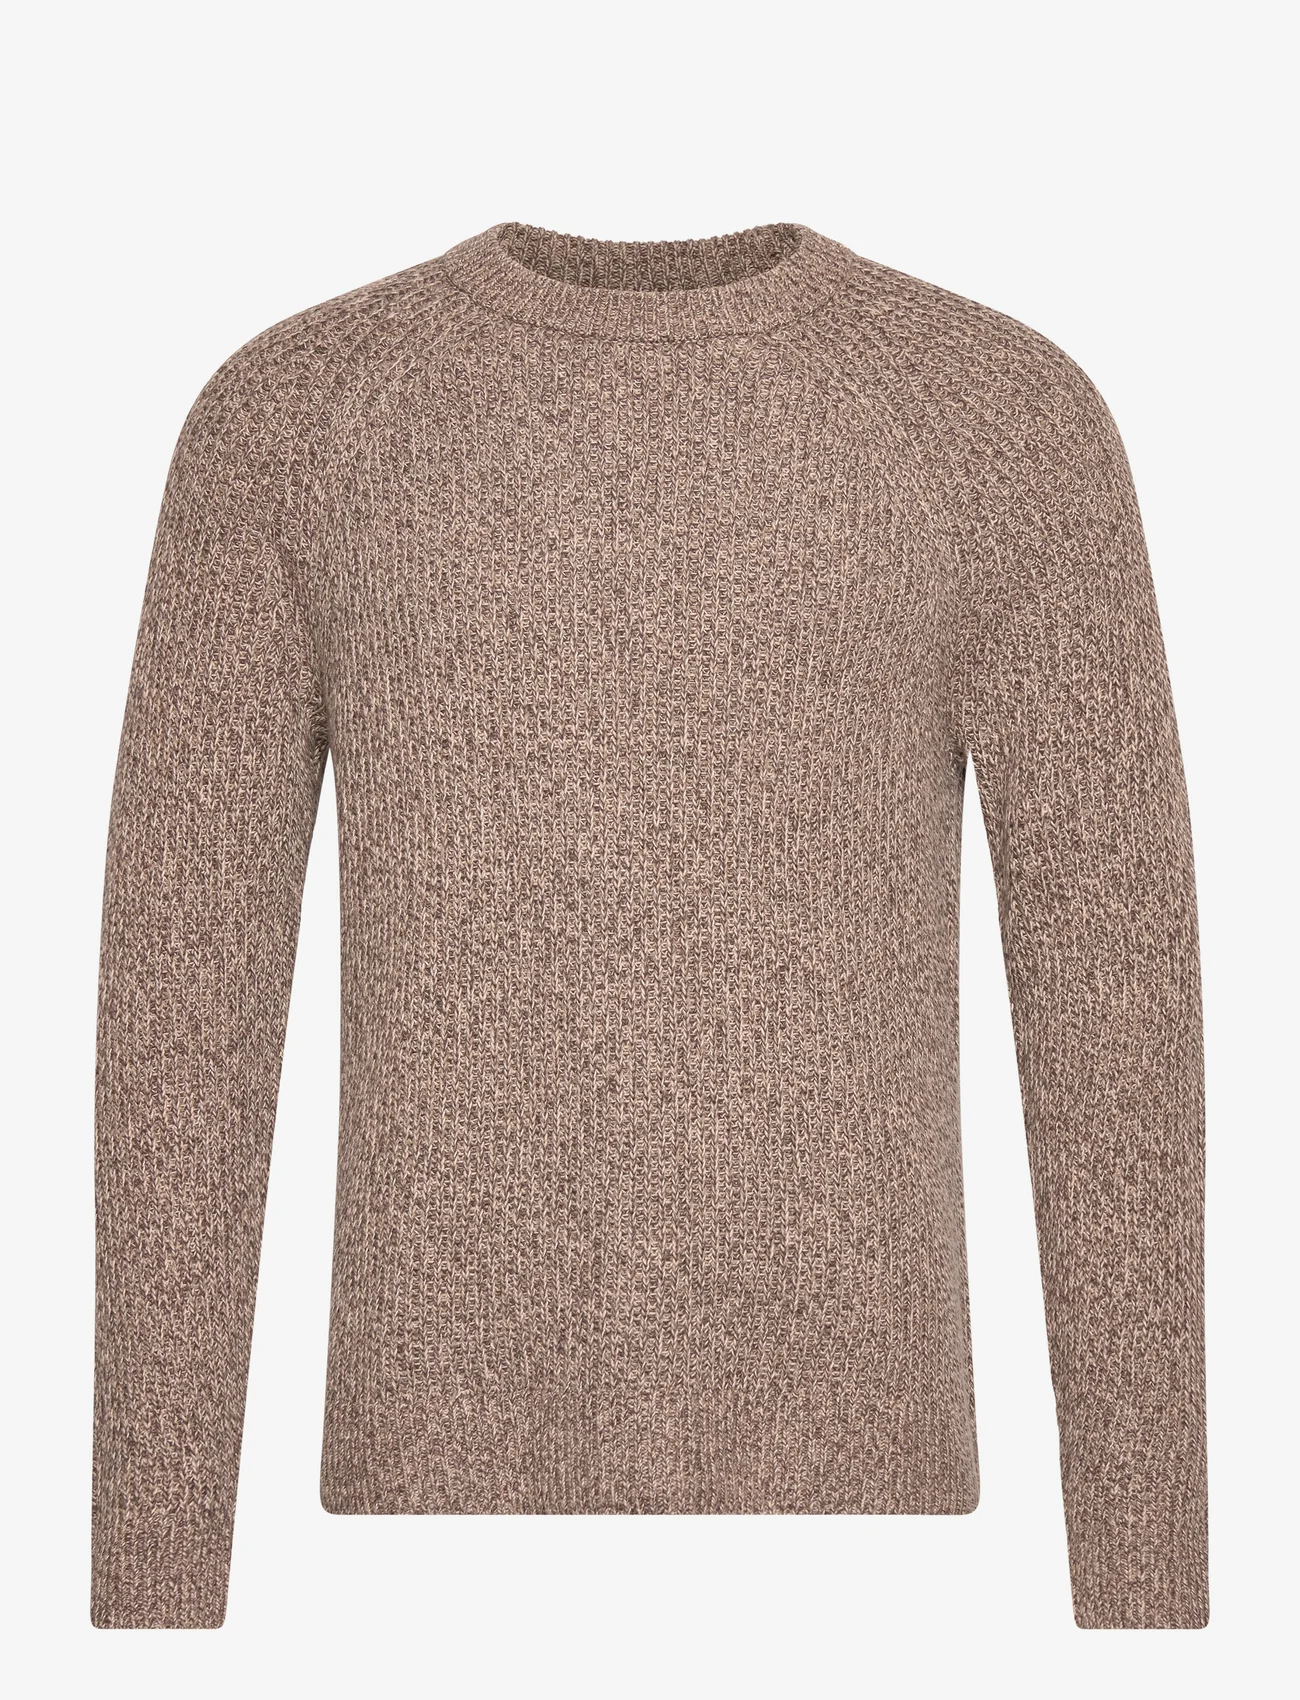 Abercrombie & Fitch - ANF MENS SWEATERS - rundhals - brown marl - 0